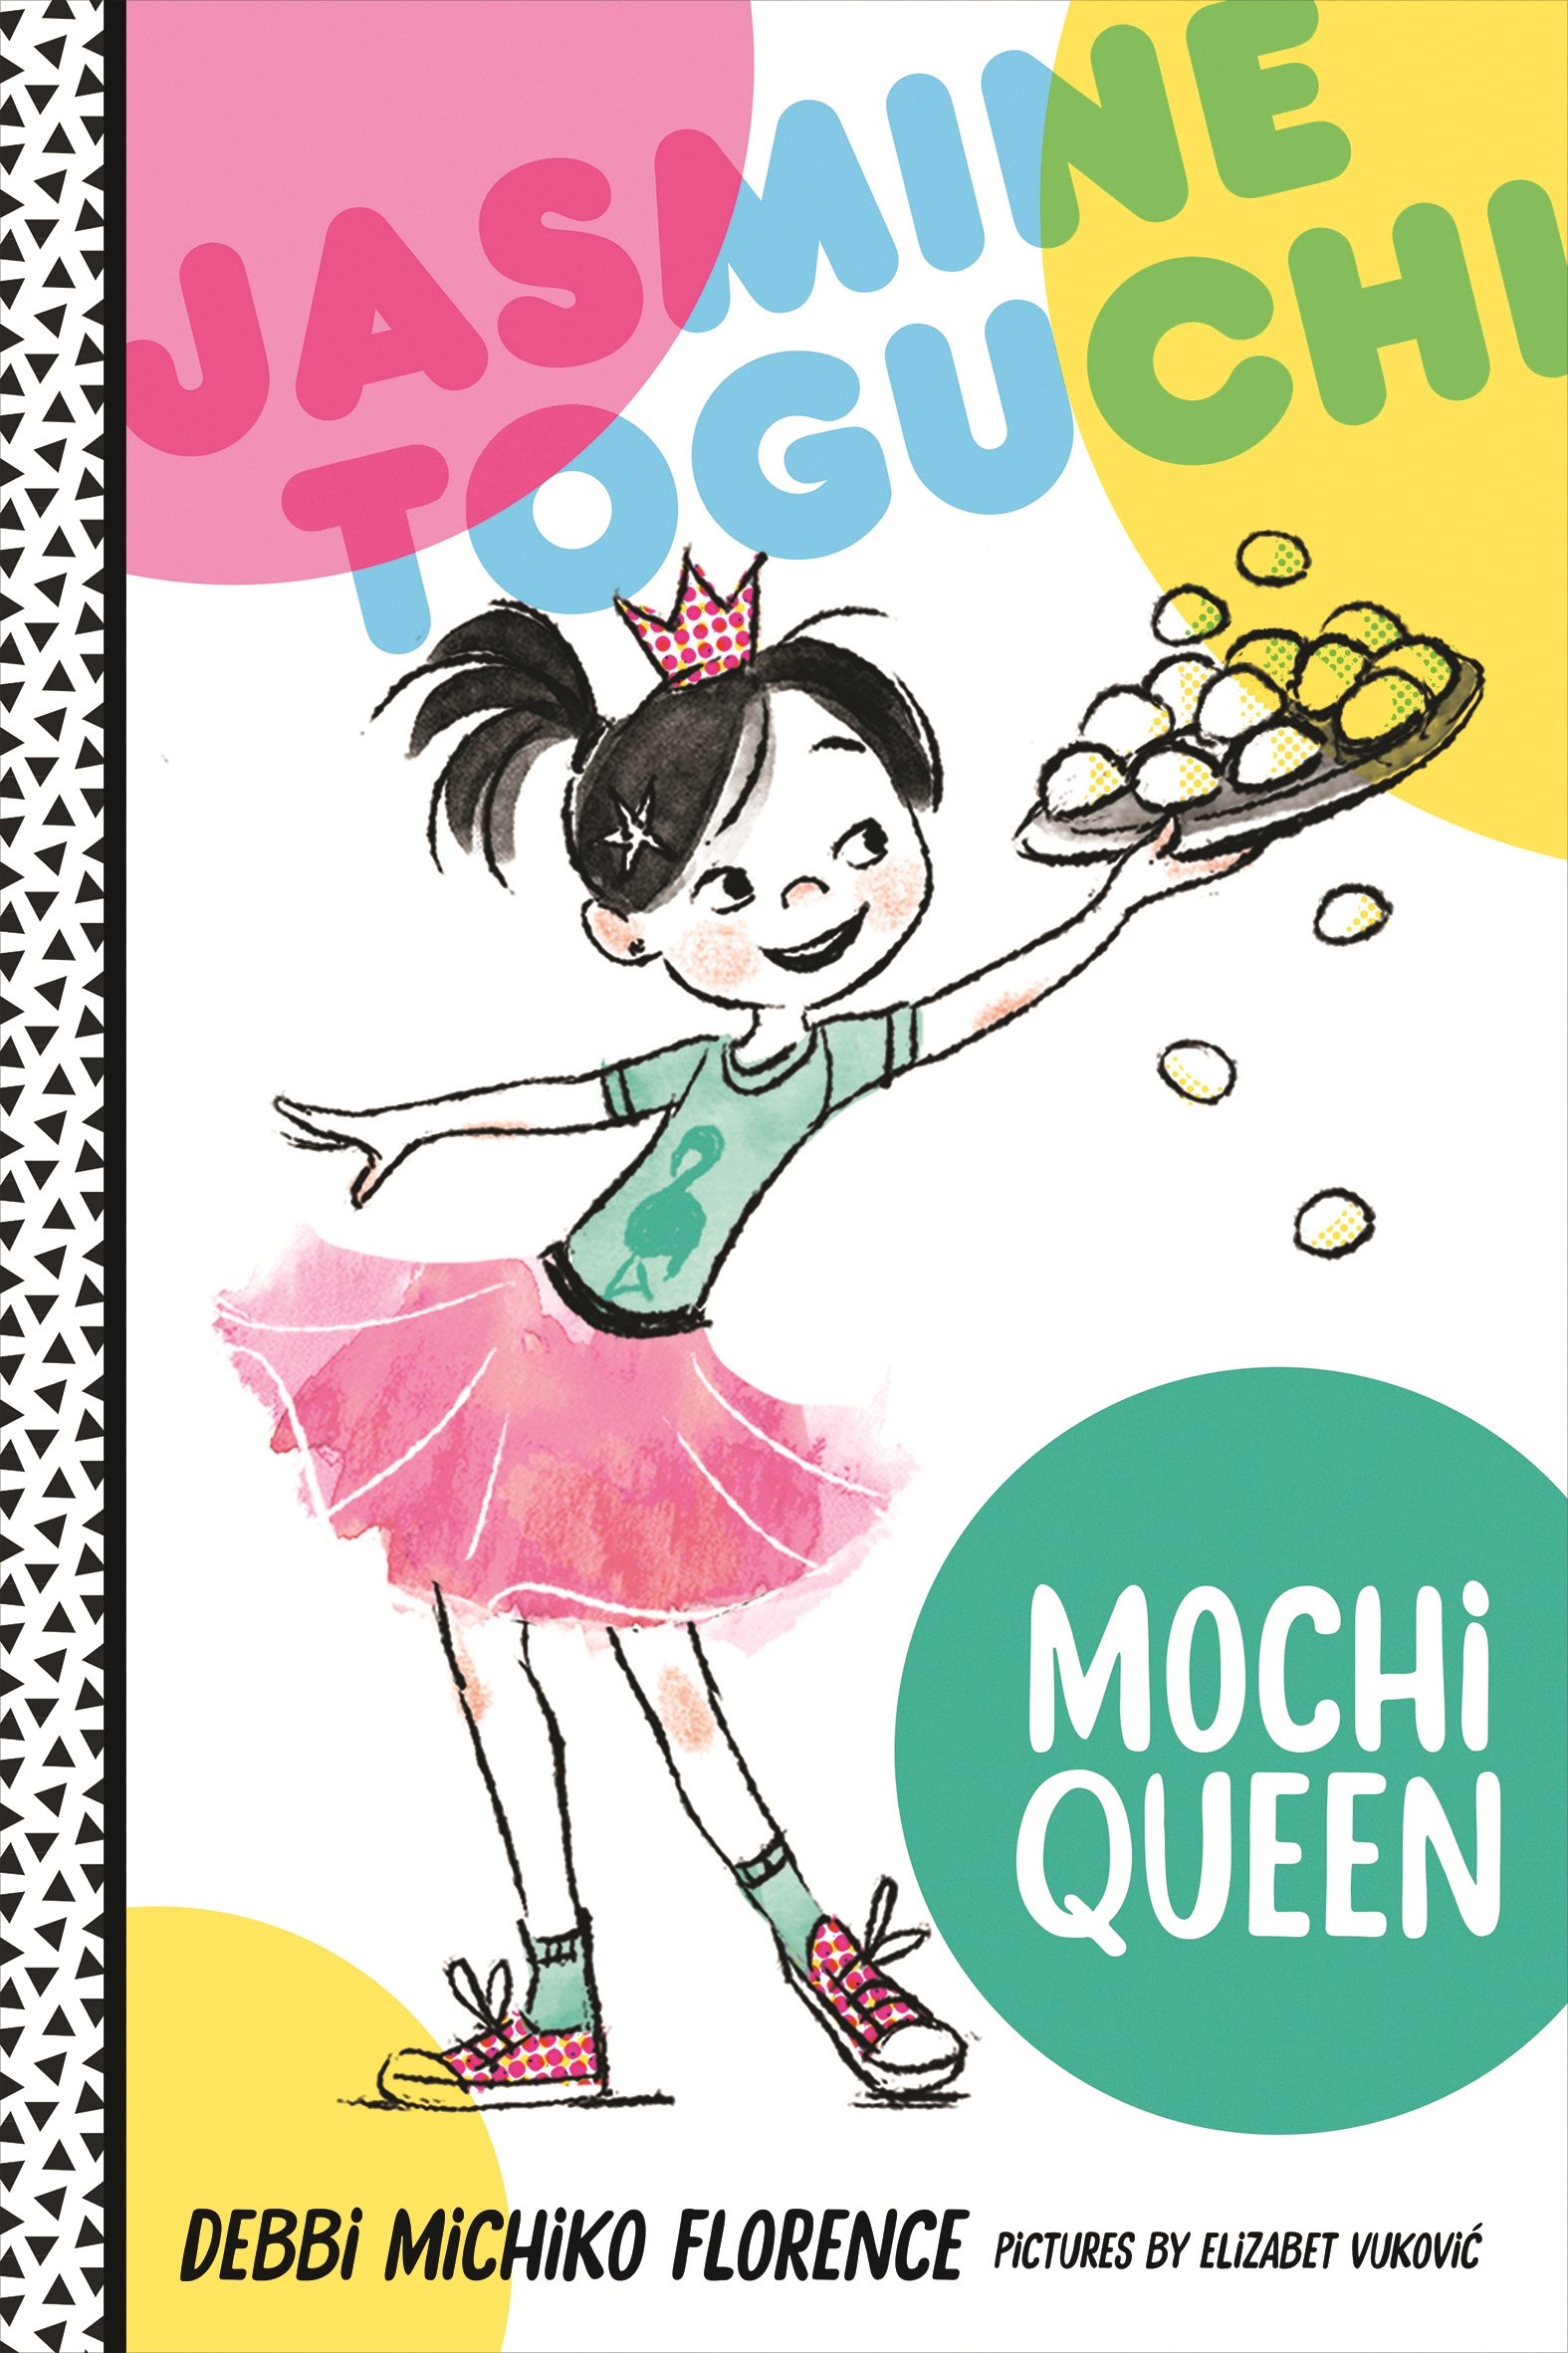 Cover of Jasmine Toguchi, Mochi Queen, showing a girl wearing a tiara and pink tutu skirt holding a plate of mochi in the air.